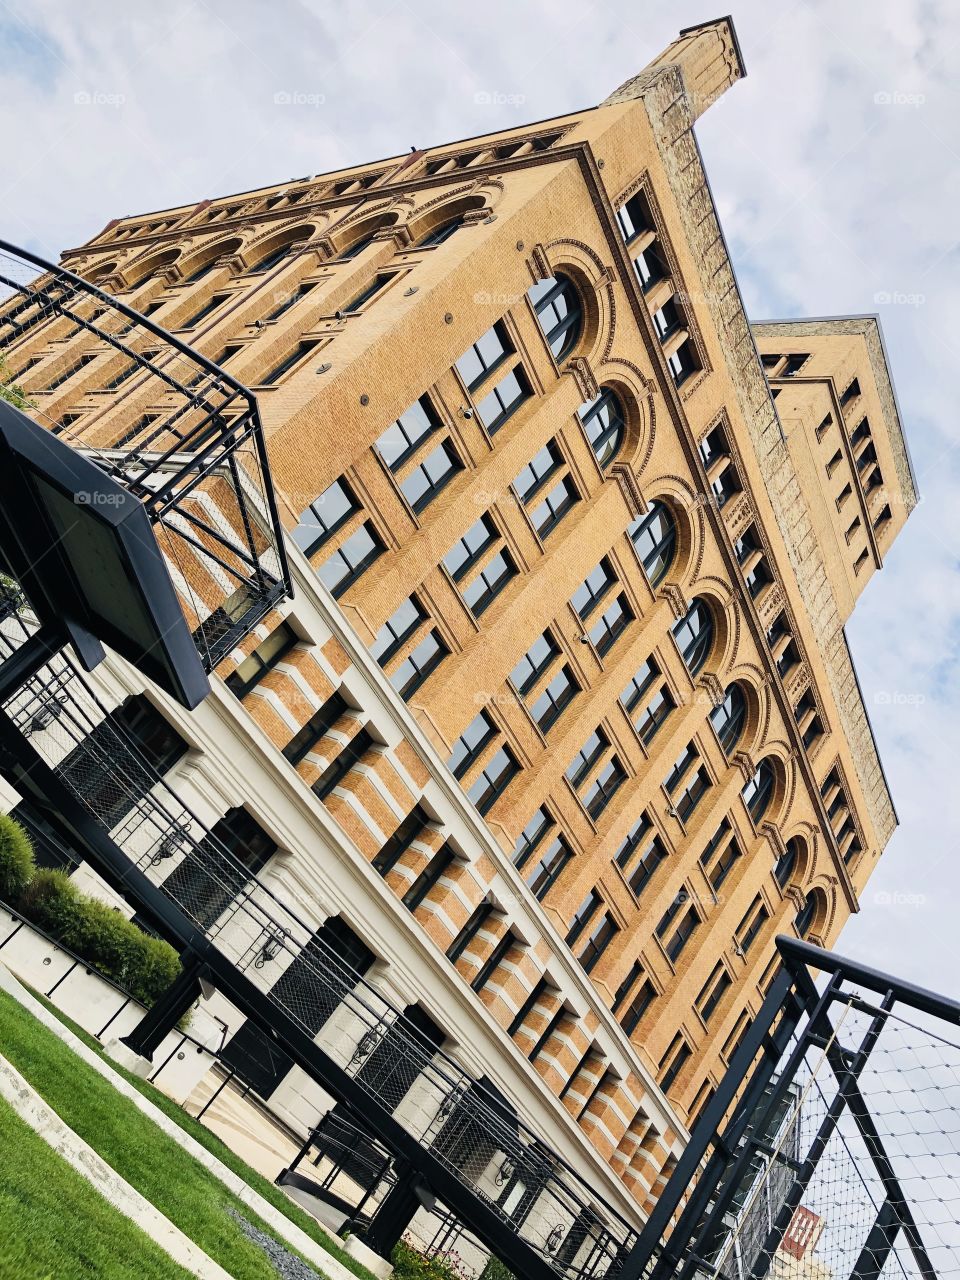 Classic architecture of a building located downtown in sunny Milwaukee, Wisconsin. Photo can be used for digital or print. Photos taken with iPhone 8.